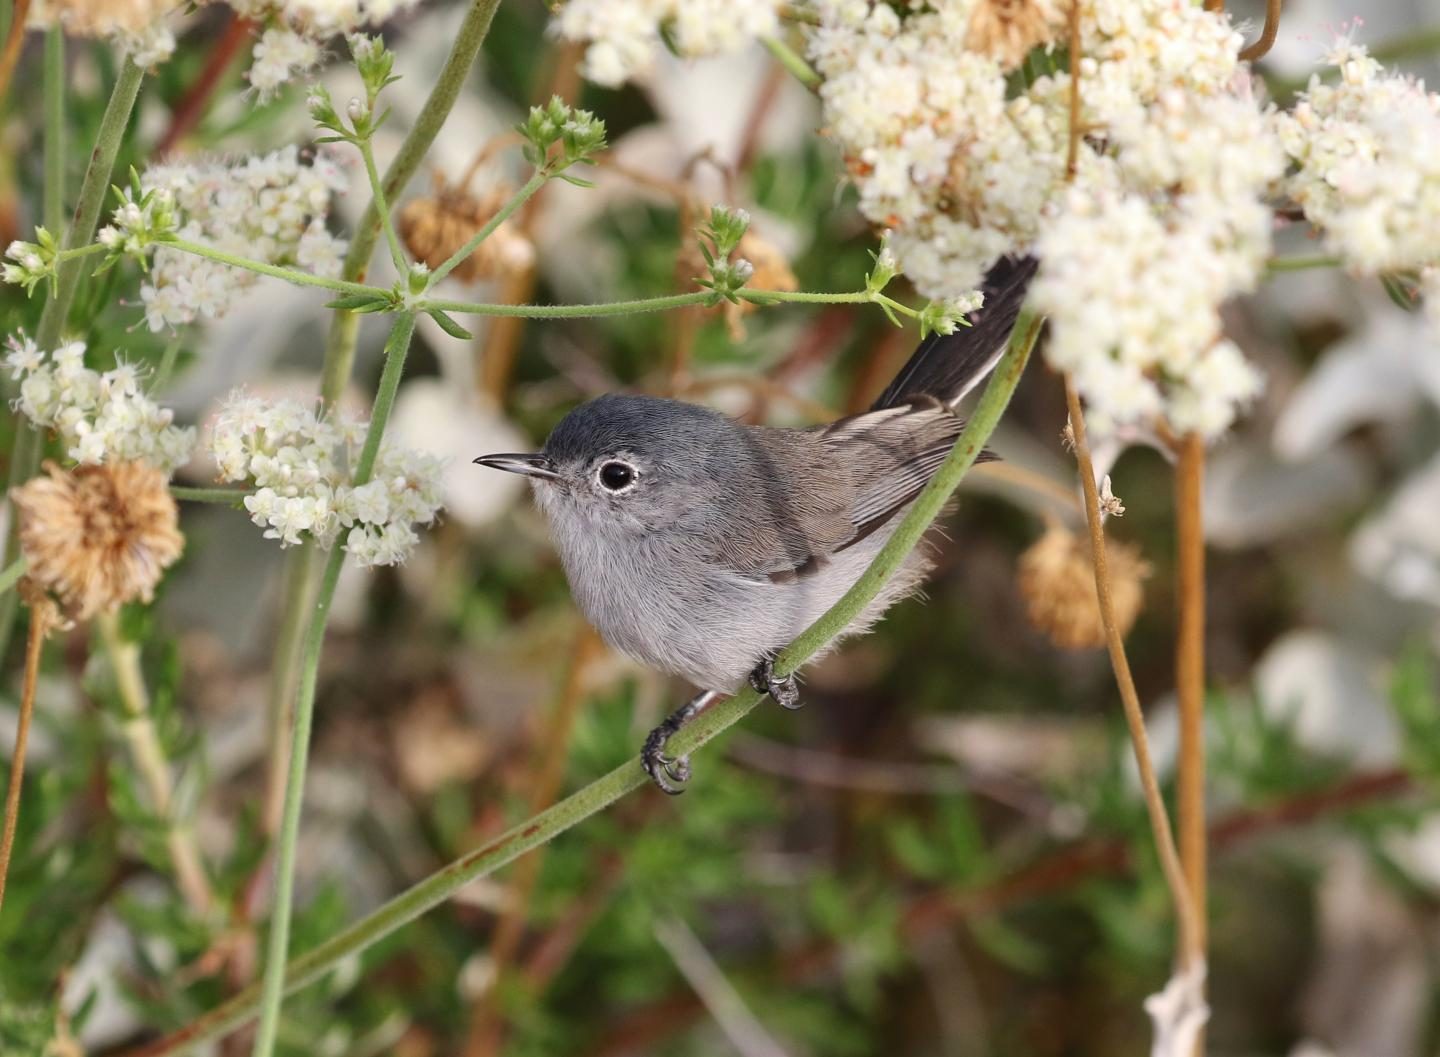 The California gnatcatcher was at the center of a decades long fight because it was designated as a threatened species. A new approach to genomic species delineation put forth by evolutionary biologists led by Jeet Sukumaran at SDSU could impact policy and lend clarity to legislation for designating a species as endangered. Image: Tom Benson, https://www.flickr.com/photos/40928097@N07/48246028557